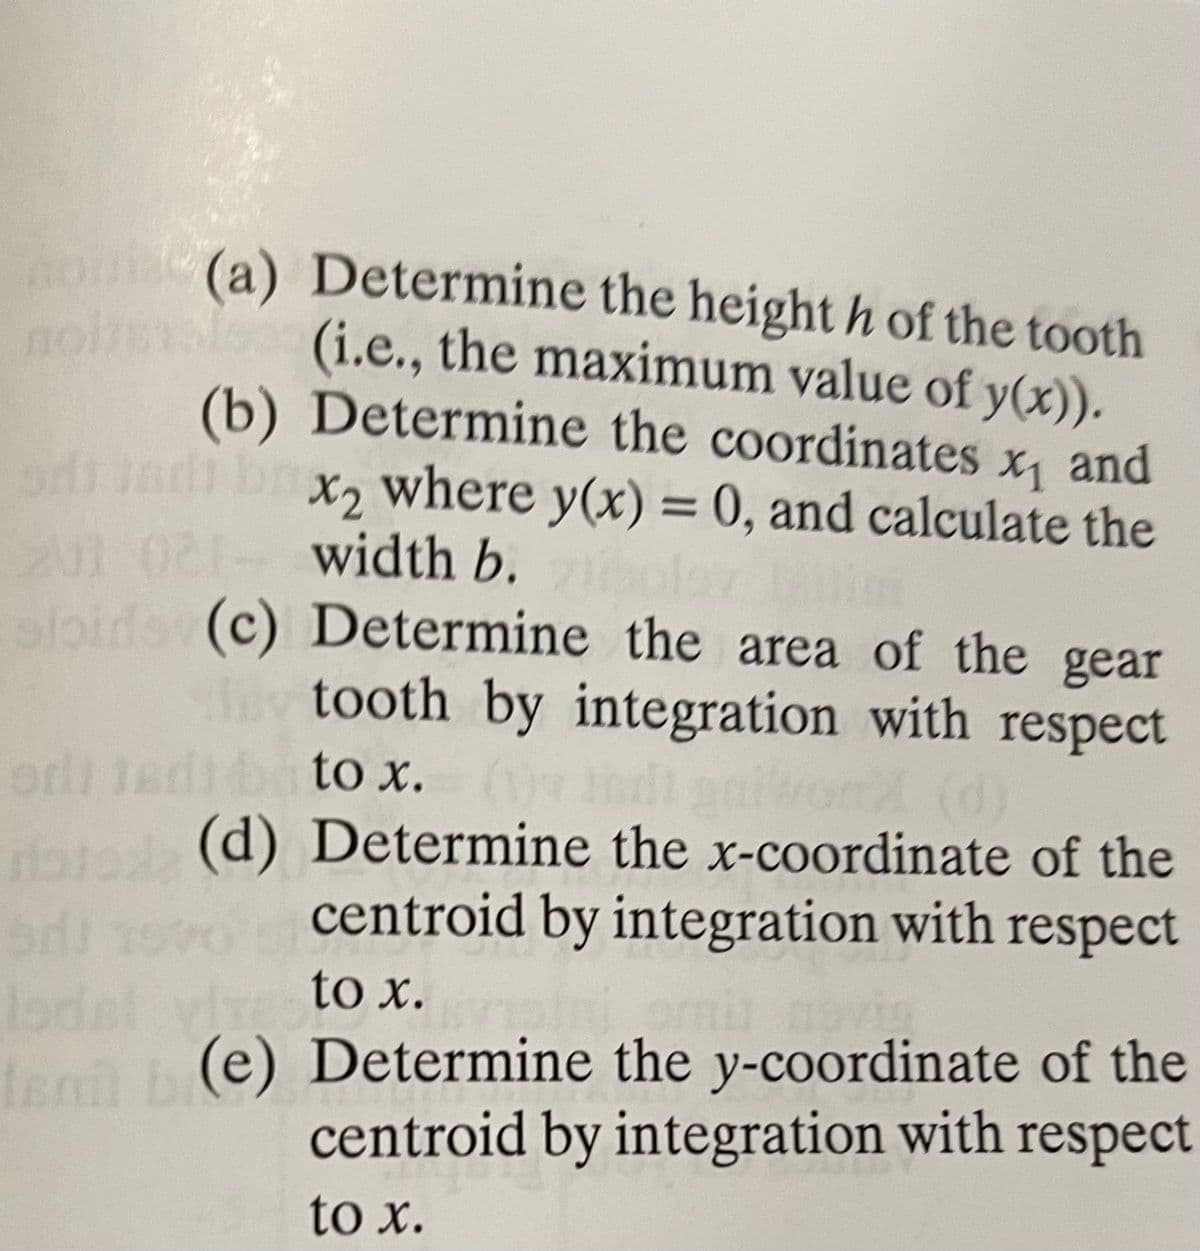 ho
(a) Determine the height h of the tooth
nohaleo
(i.e., the maximum value of y(x)).
(b) Determine the coordinates x, and
od adi br
102 width b. lov
loido (c) Determine the area of the gear
lev tooth by integration with respect
X2 where y(x) = 0, and calculate the
od Jedib t x.
(d) Determine the x-coordinate of the
centroid by integration with respect
to x.
Iegi (e) Determine the y-coordinate of the
centroid by integration with respect
to x.
